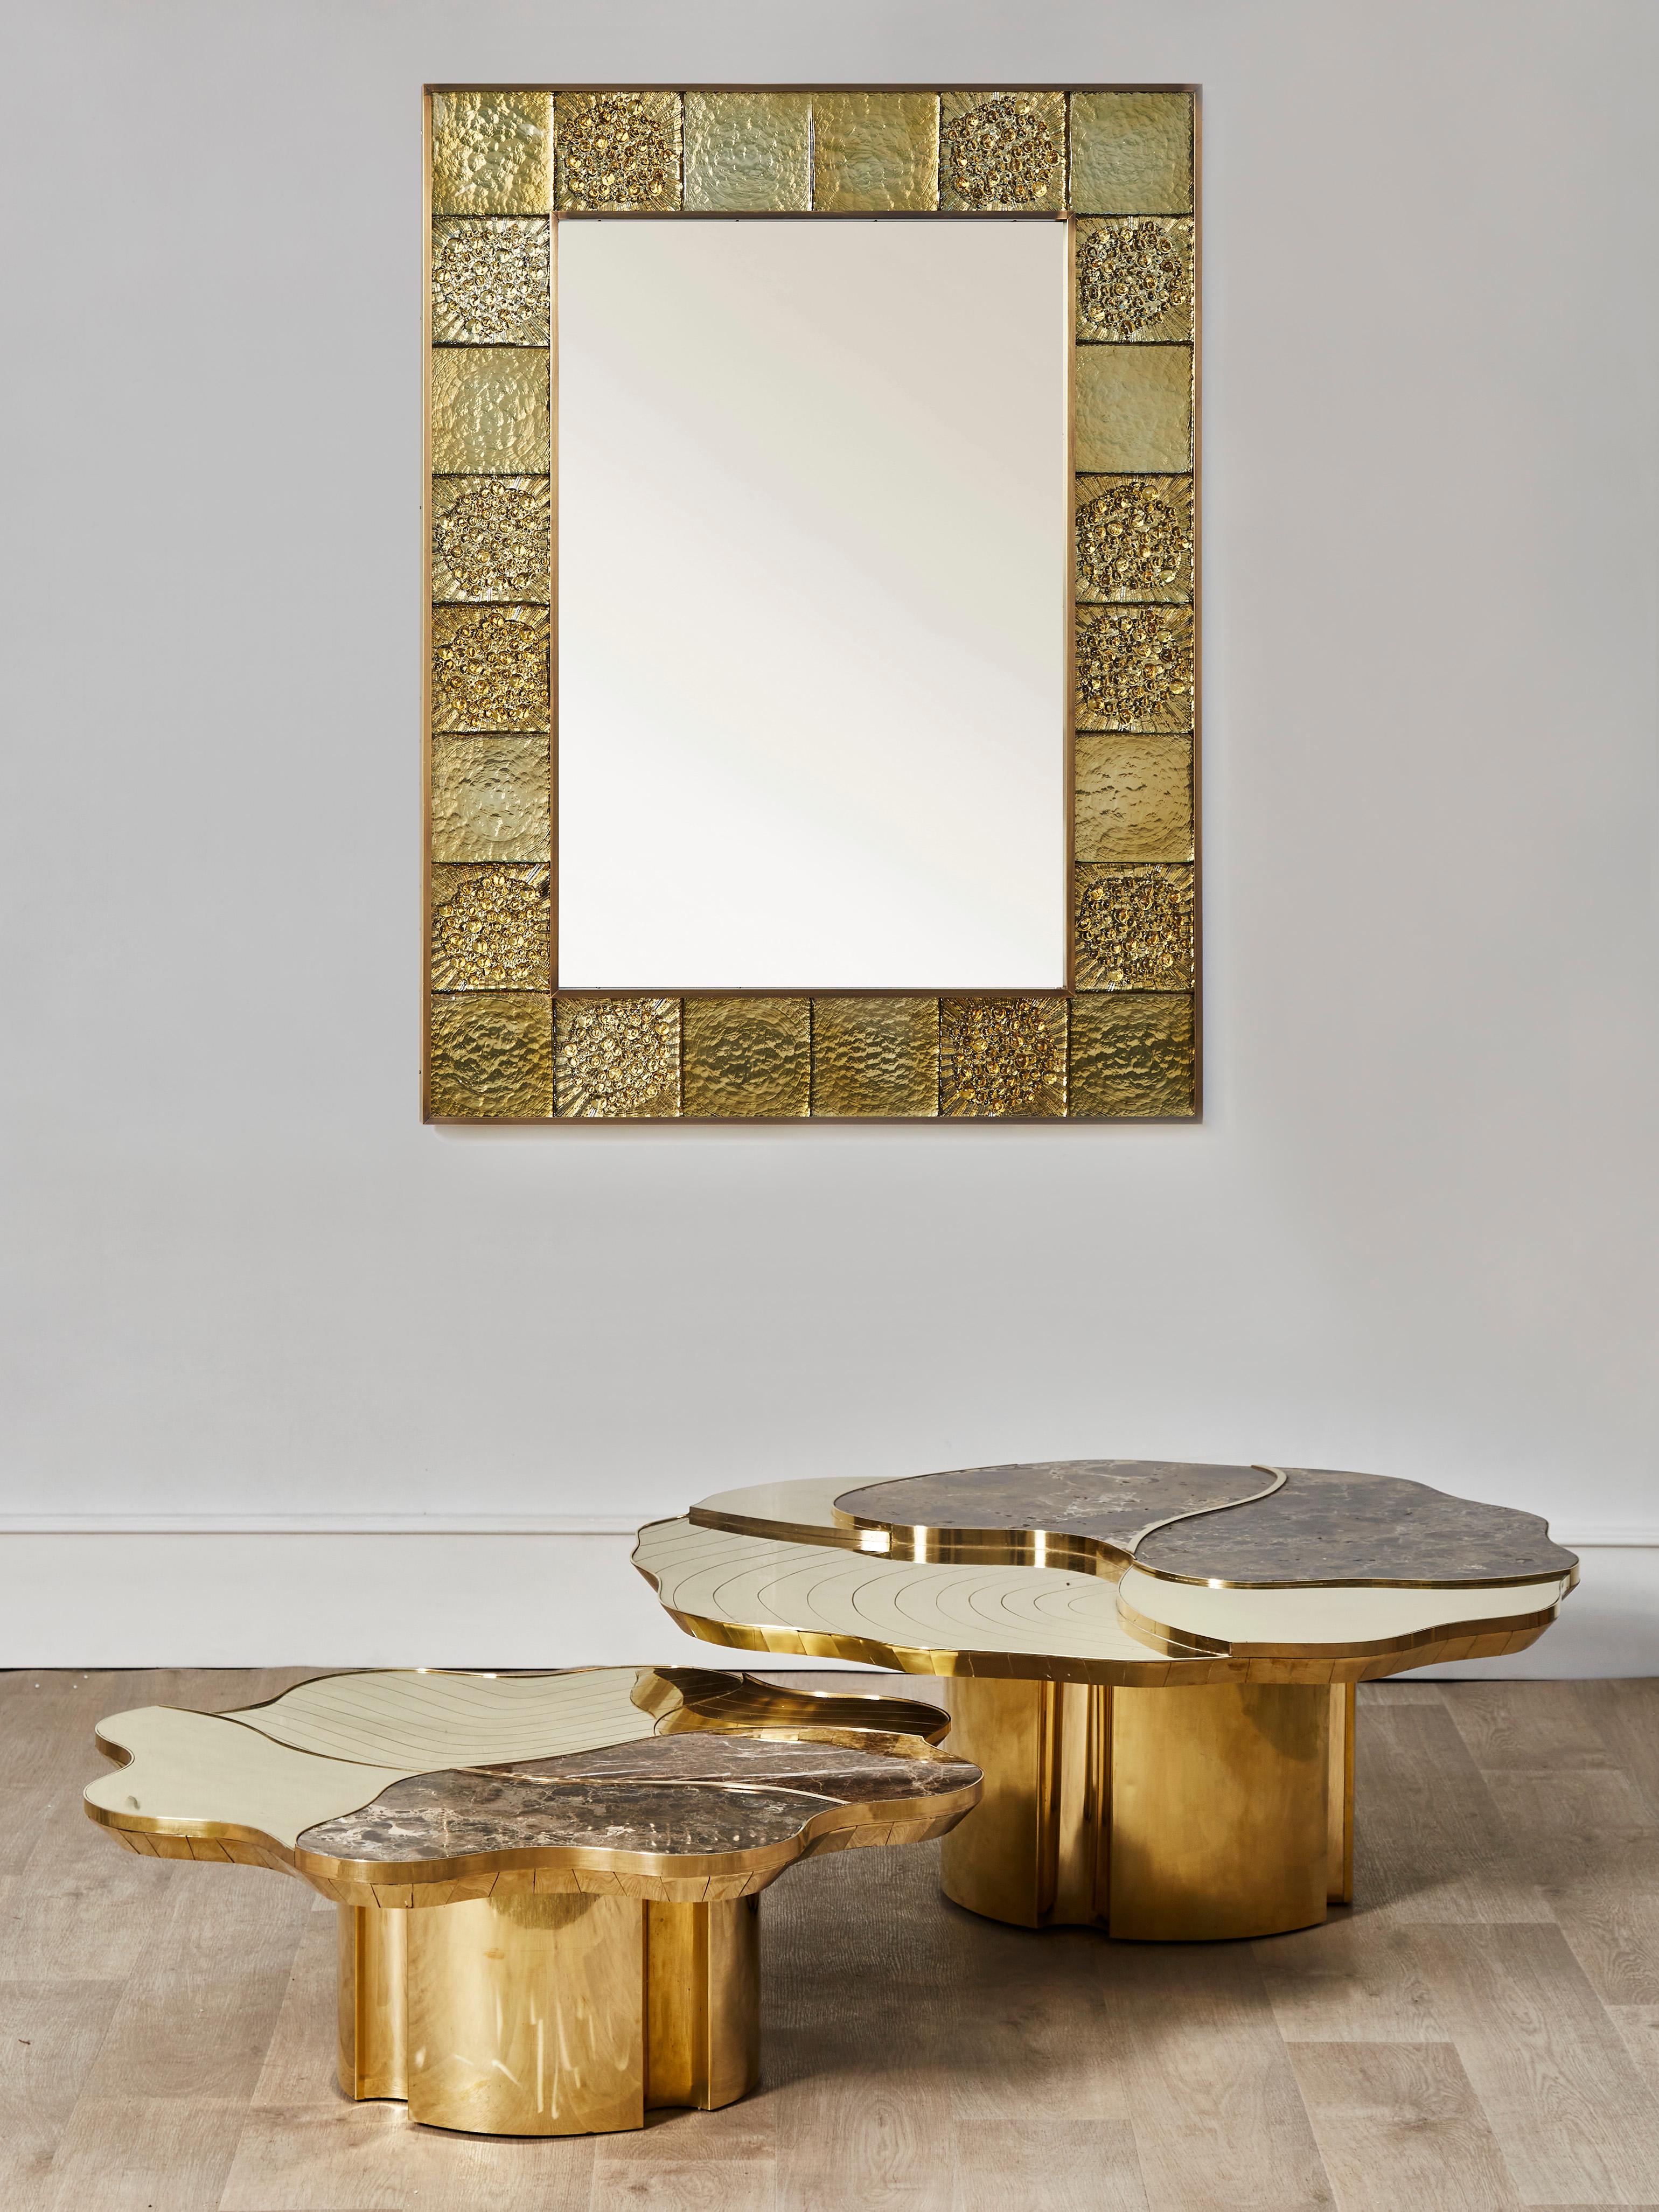 Stunning coffee table in 2 parts with two different heights, made of carved brass and marble stone.
Creation by Studio Glustin.
France, 2021.

Dimensions:
- 108 x 102 x H 37 cm
- 90 x 90 x H 33 cm.